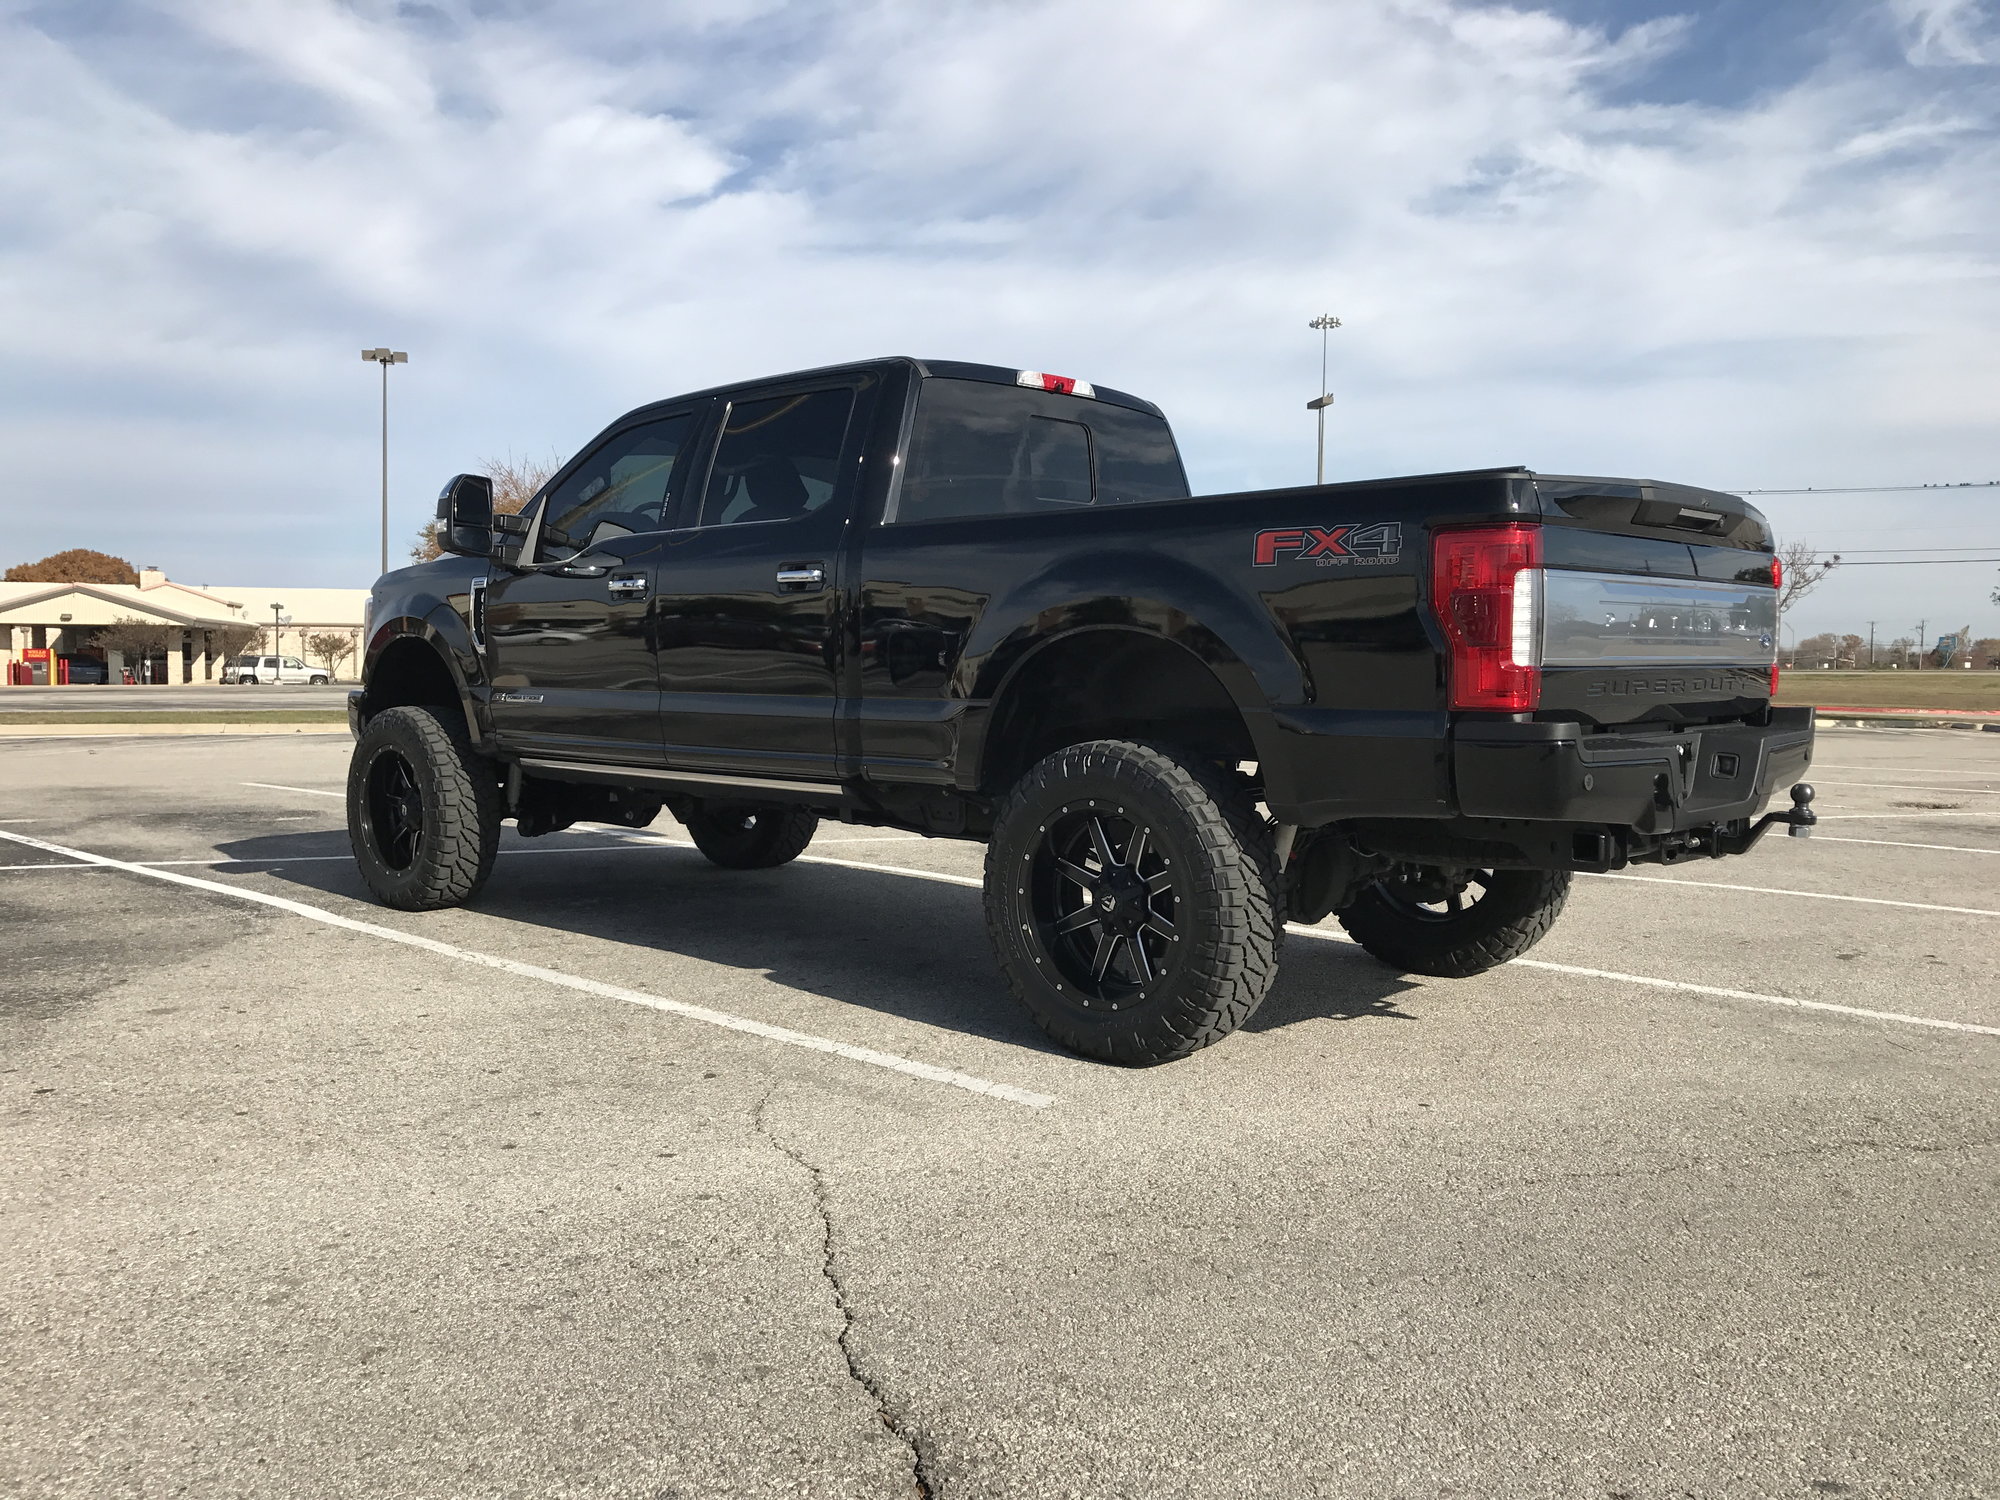  Lifted  2022 F250  with 37 s Pics Page 5 Ford  Truck  